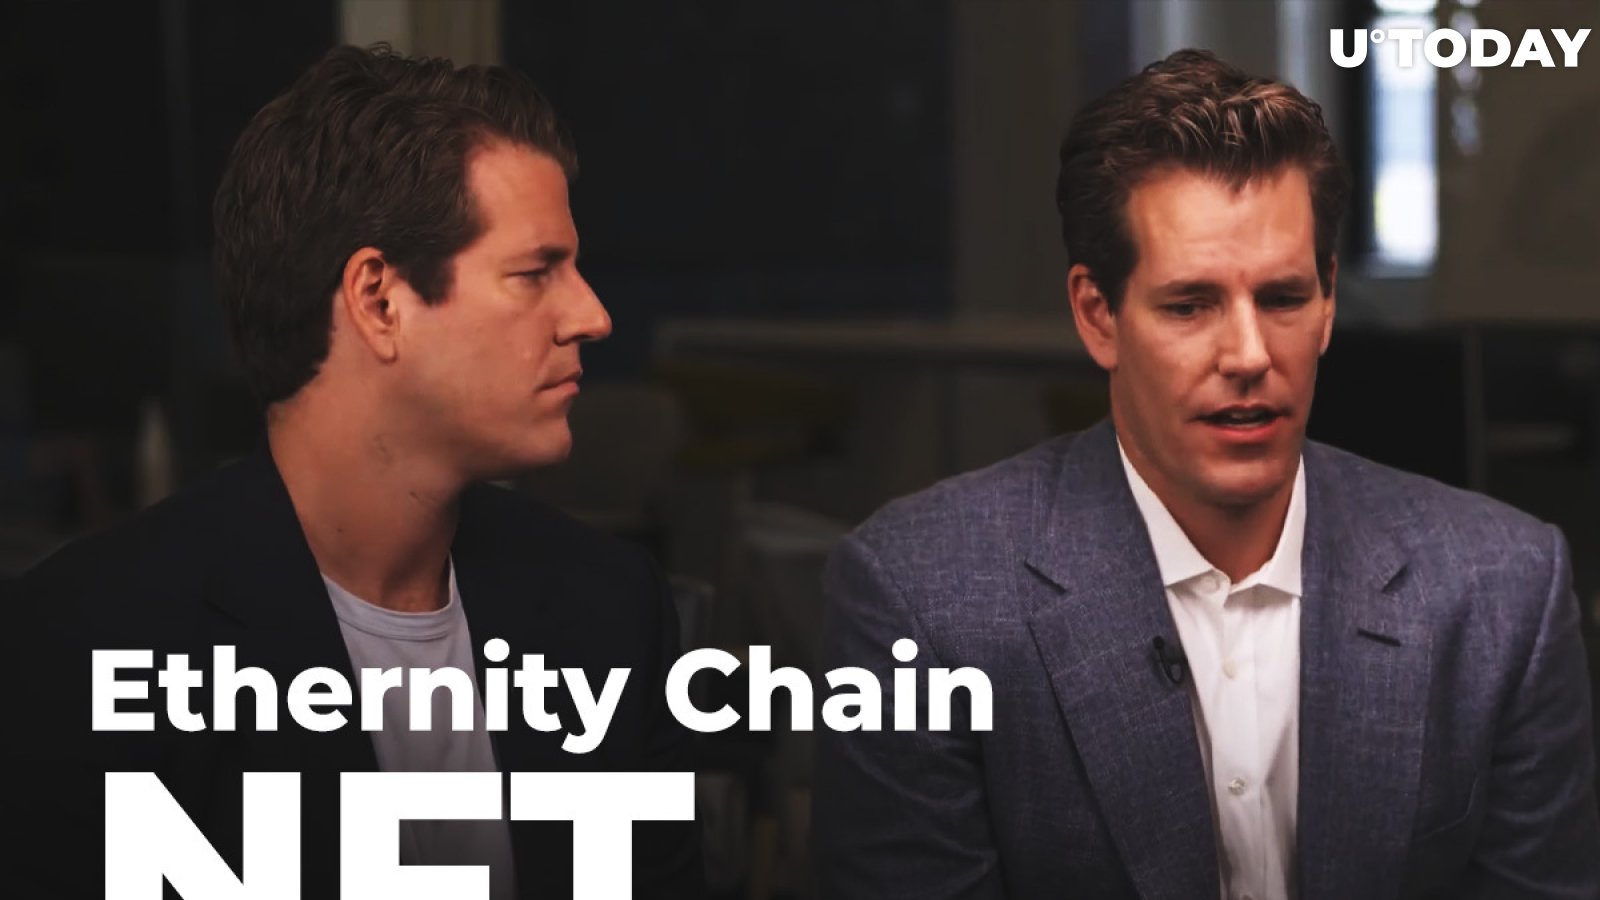 Ethernity Chain (ERN) to Release Exclusive NFT by Winklevoss Twins